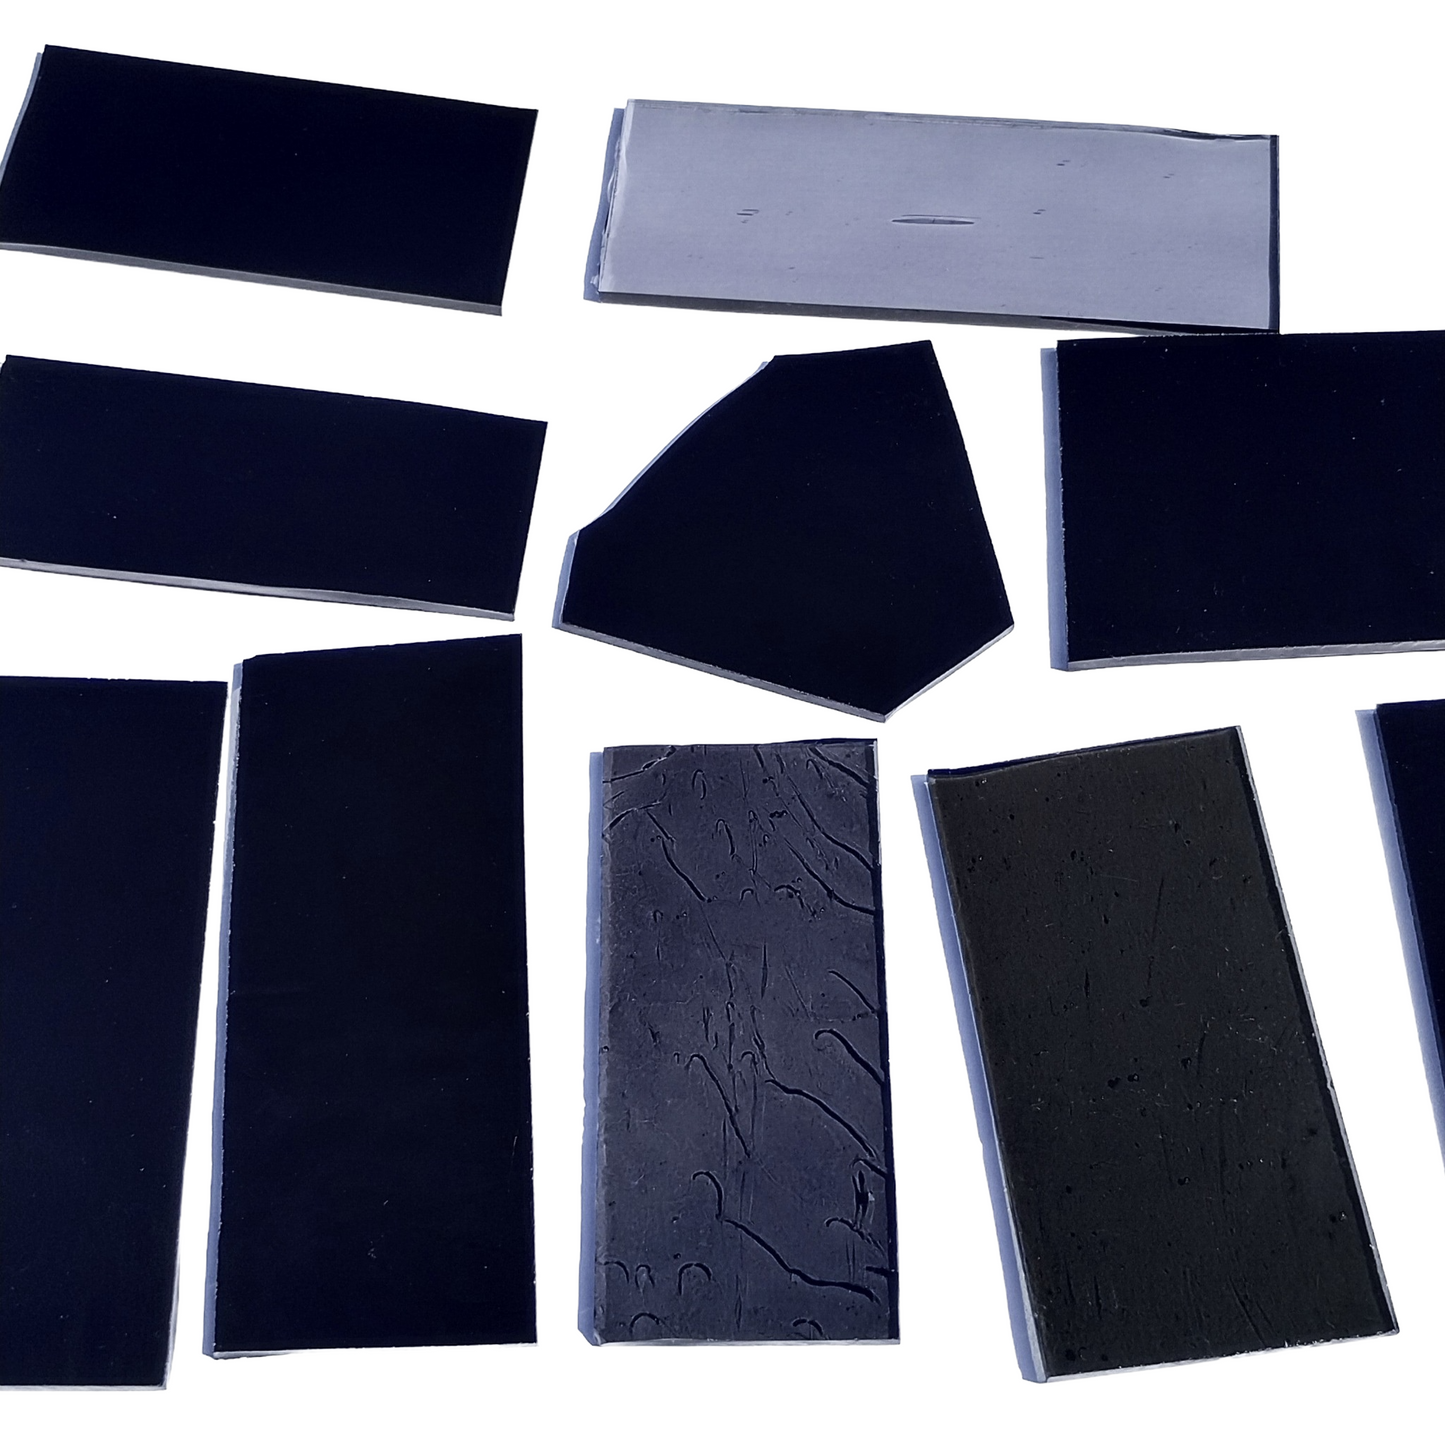 Assorted Black and Gray Stained Glass Scrap Pieces, Curated 1 lb Package. Hand picked, sorted by color, clean. Black, gray art glass assortment perfect for stained glass and mosaic art. Ships carefully in 1 business day. Free shipping available.